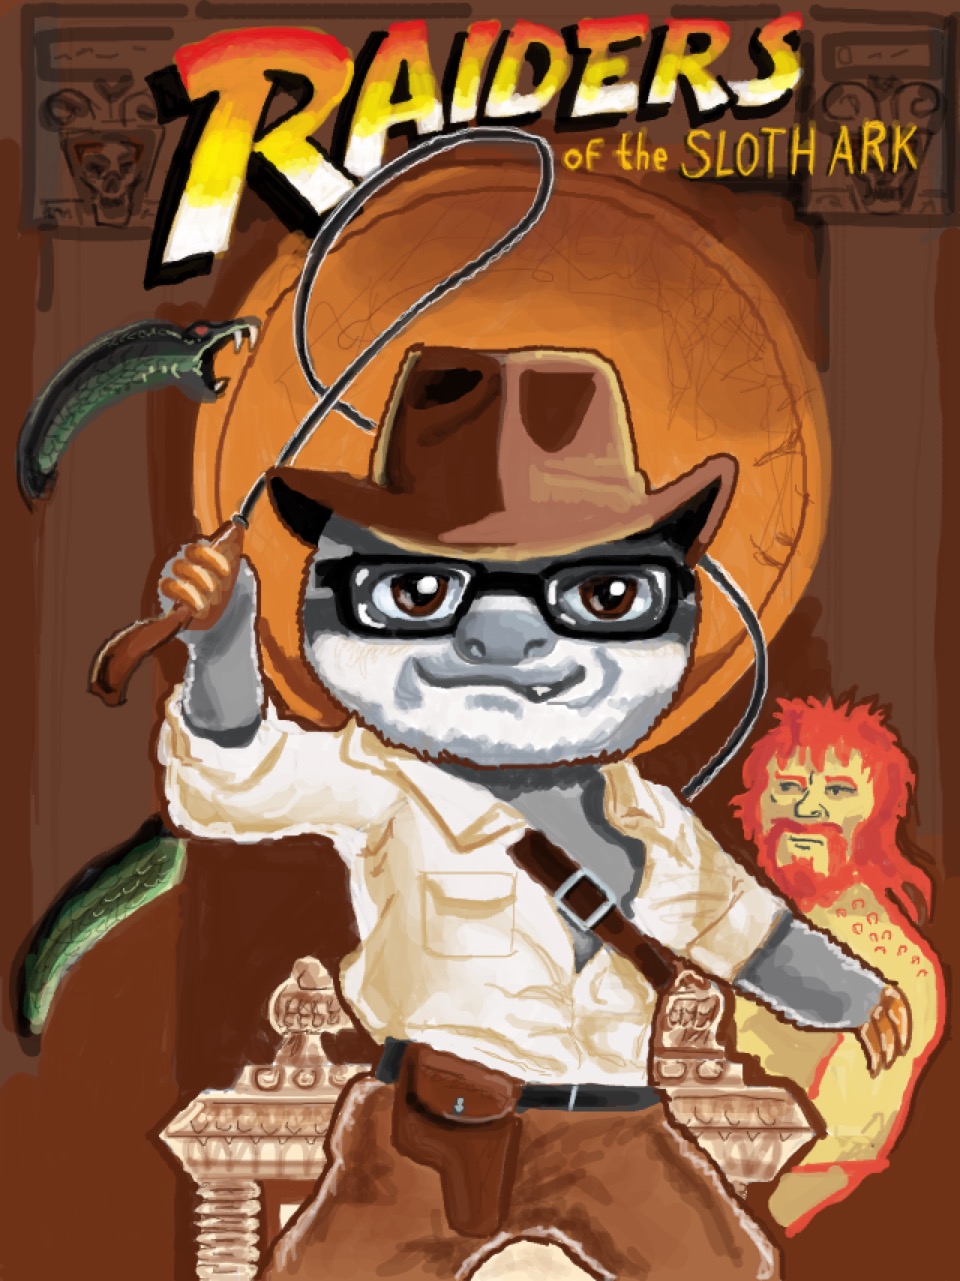 Parody of the Raiders of the Lost Ark poster, with Indy as a sloth wearing glasses, and the French Girls app mascot on the background.